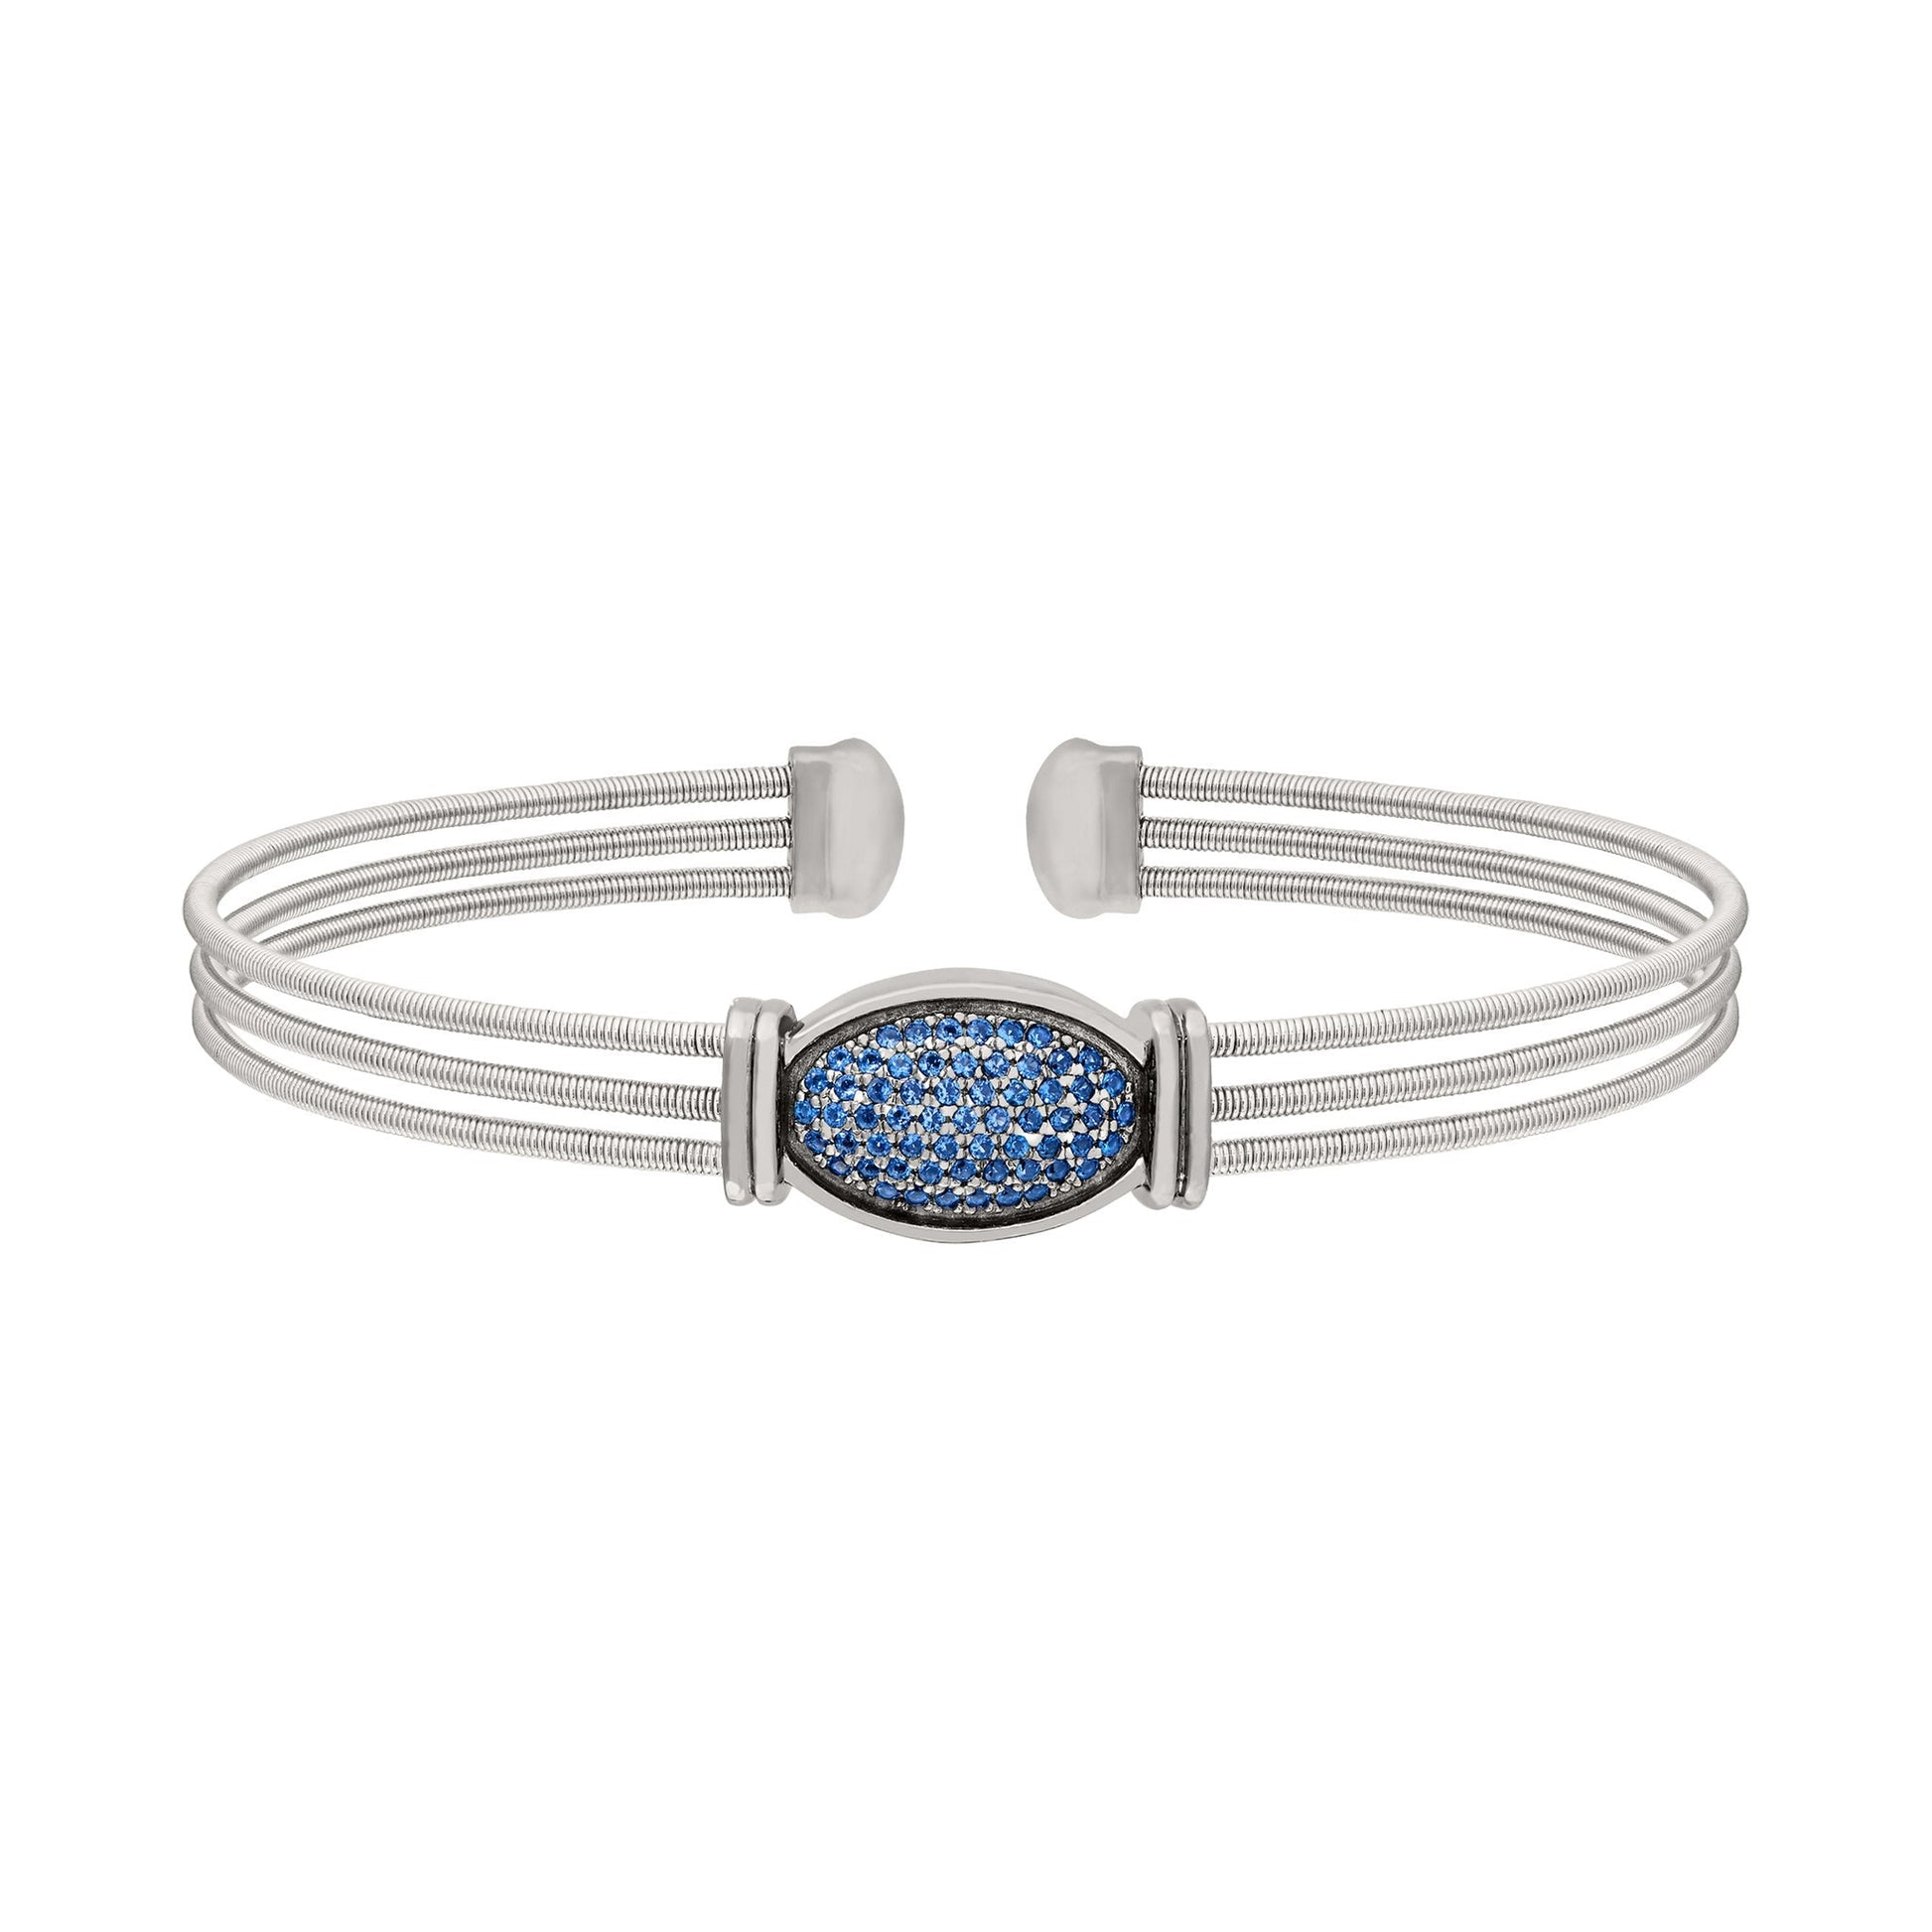 A three cable bracelet with oval gemstone accents displayed on a neutral white background.